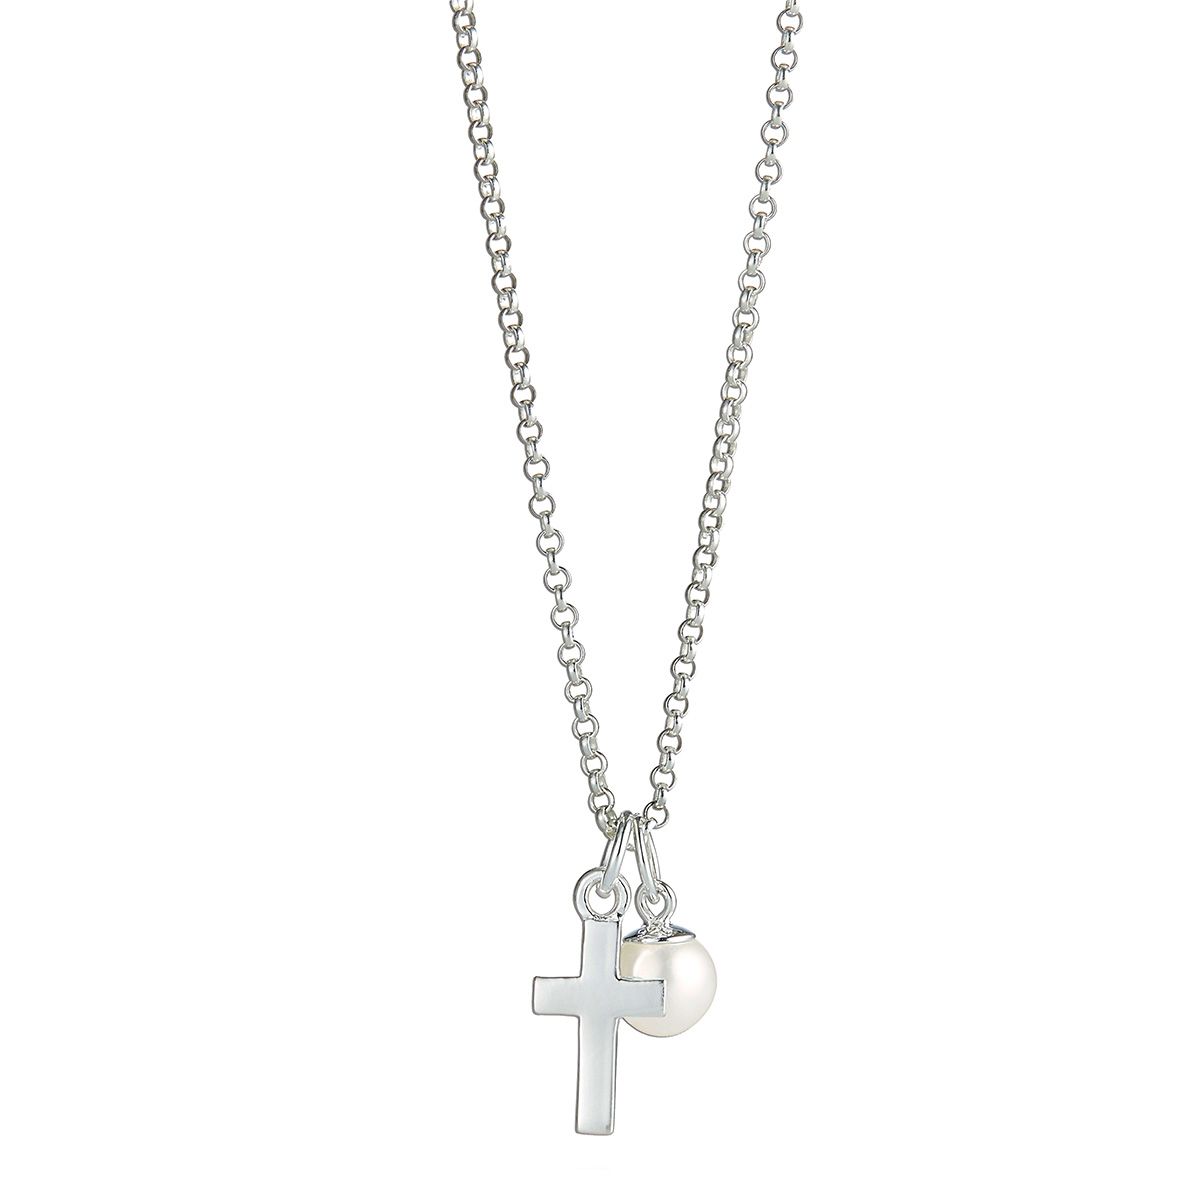 Baptism Personalized Cross Necklace – Reflection of Memories